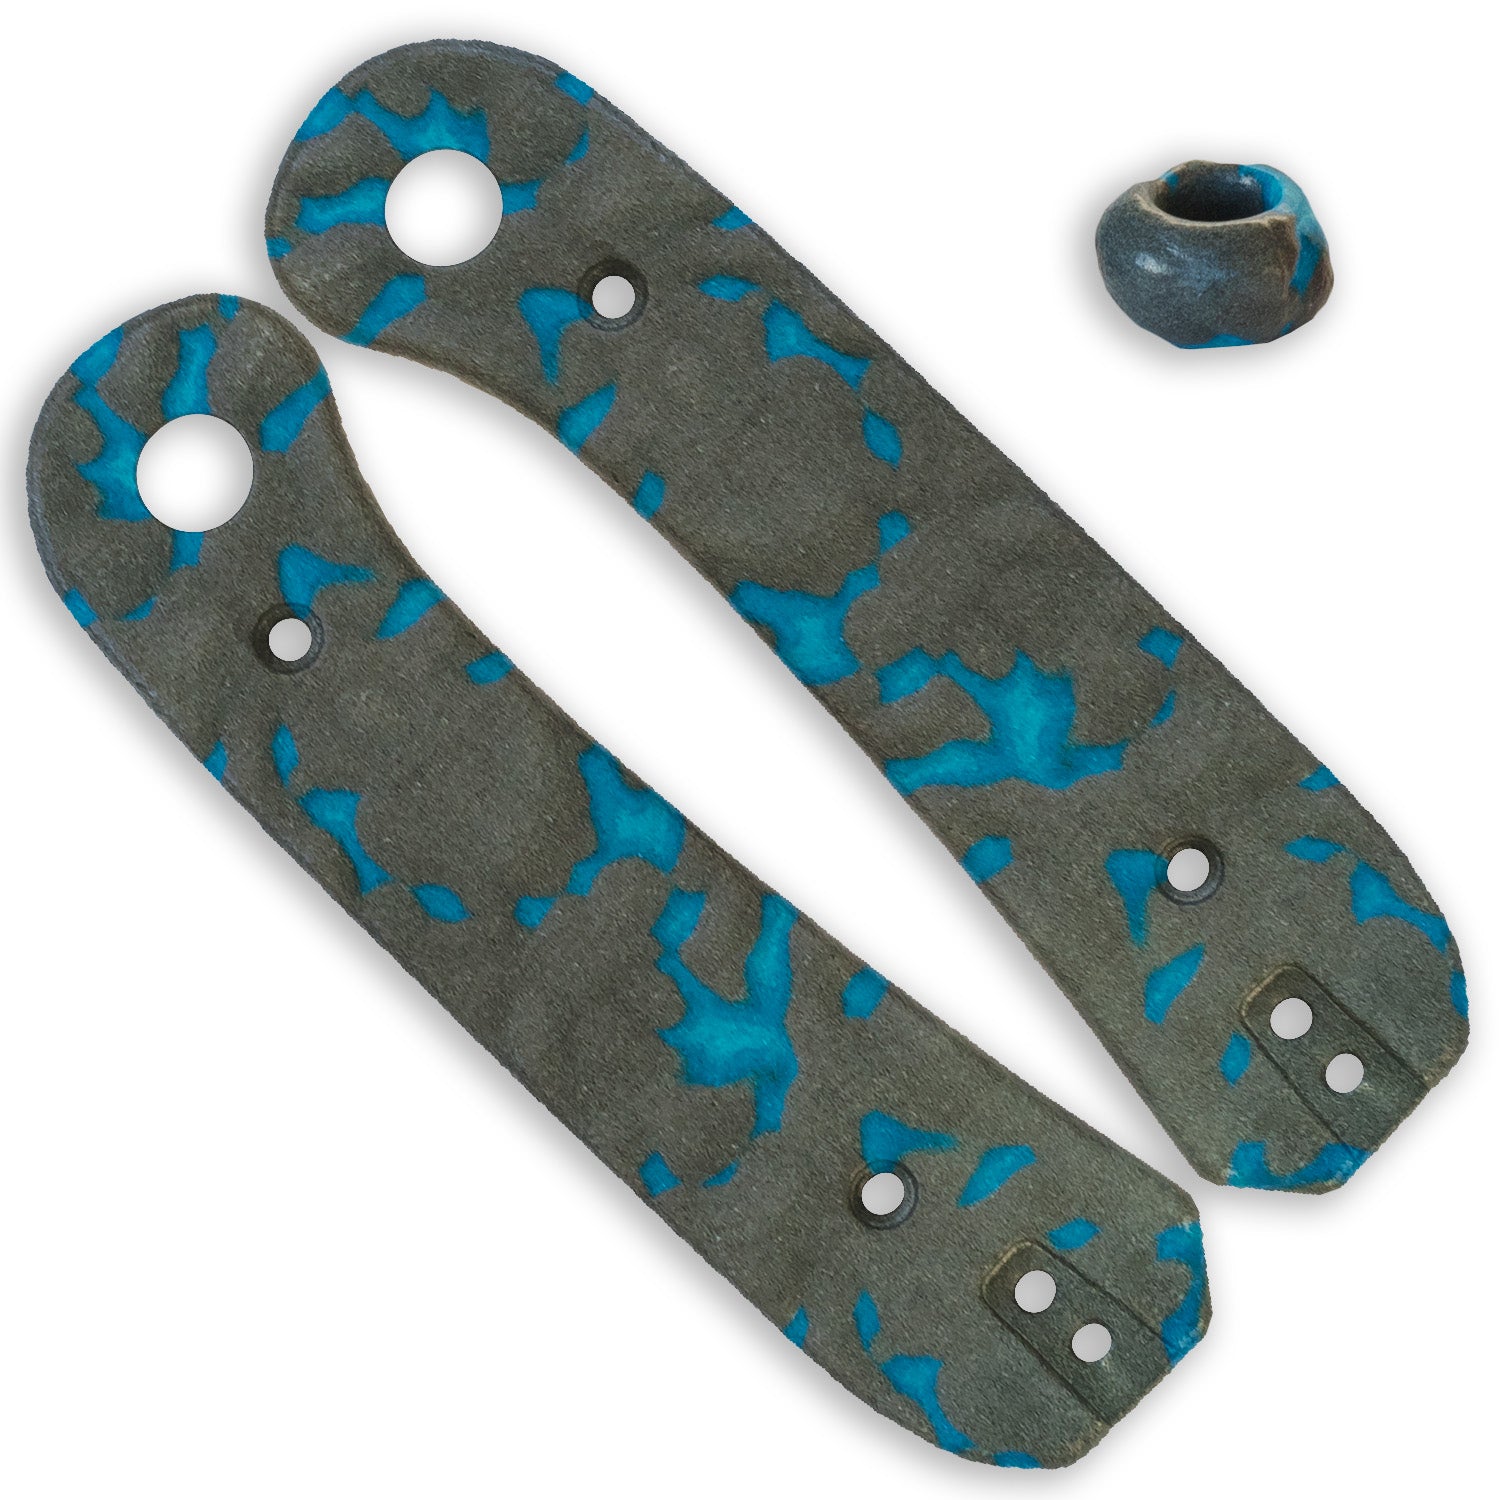 Lander 1 Knife Scales - Lava - Icy Blue